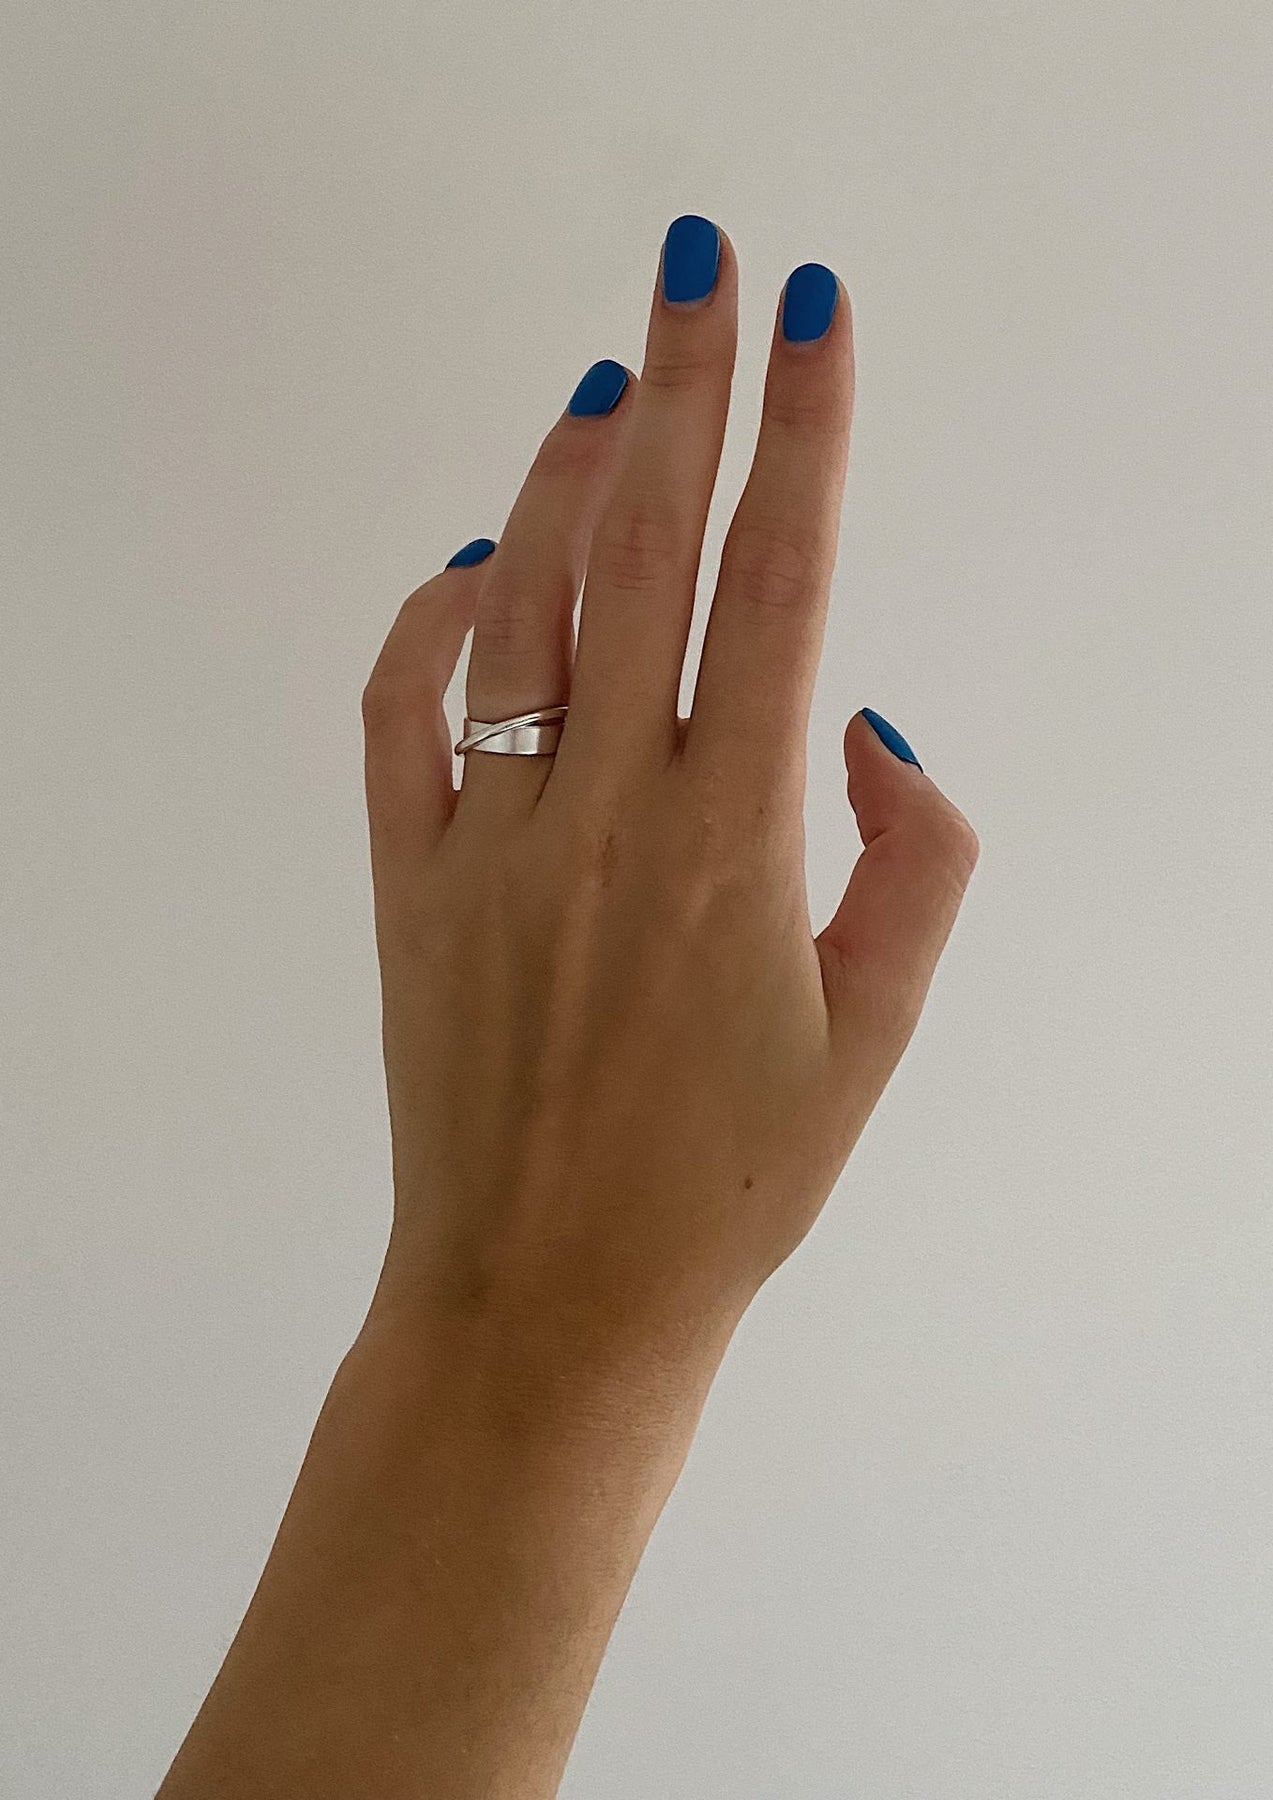 A hand wearing the Andromeda Ring - Silver, showcasing blue painted nails. Hand-crafted sterling silver ring with unique angles, 3mm thick, 7.3mm high, 4.1-4.5g weight. Sustainable packaging. Made in Europe.